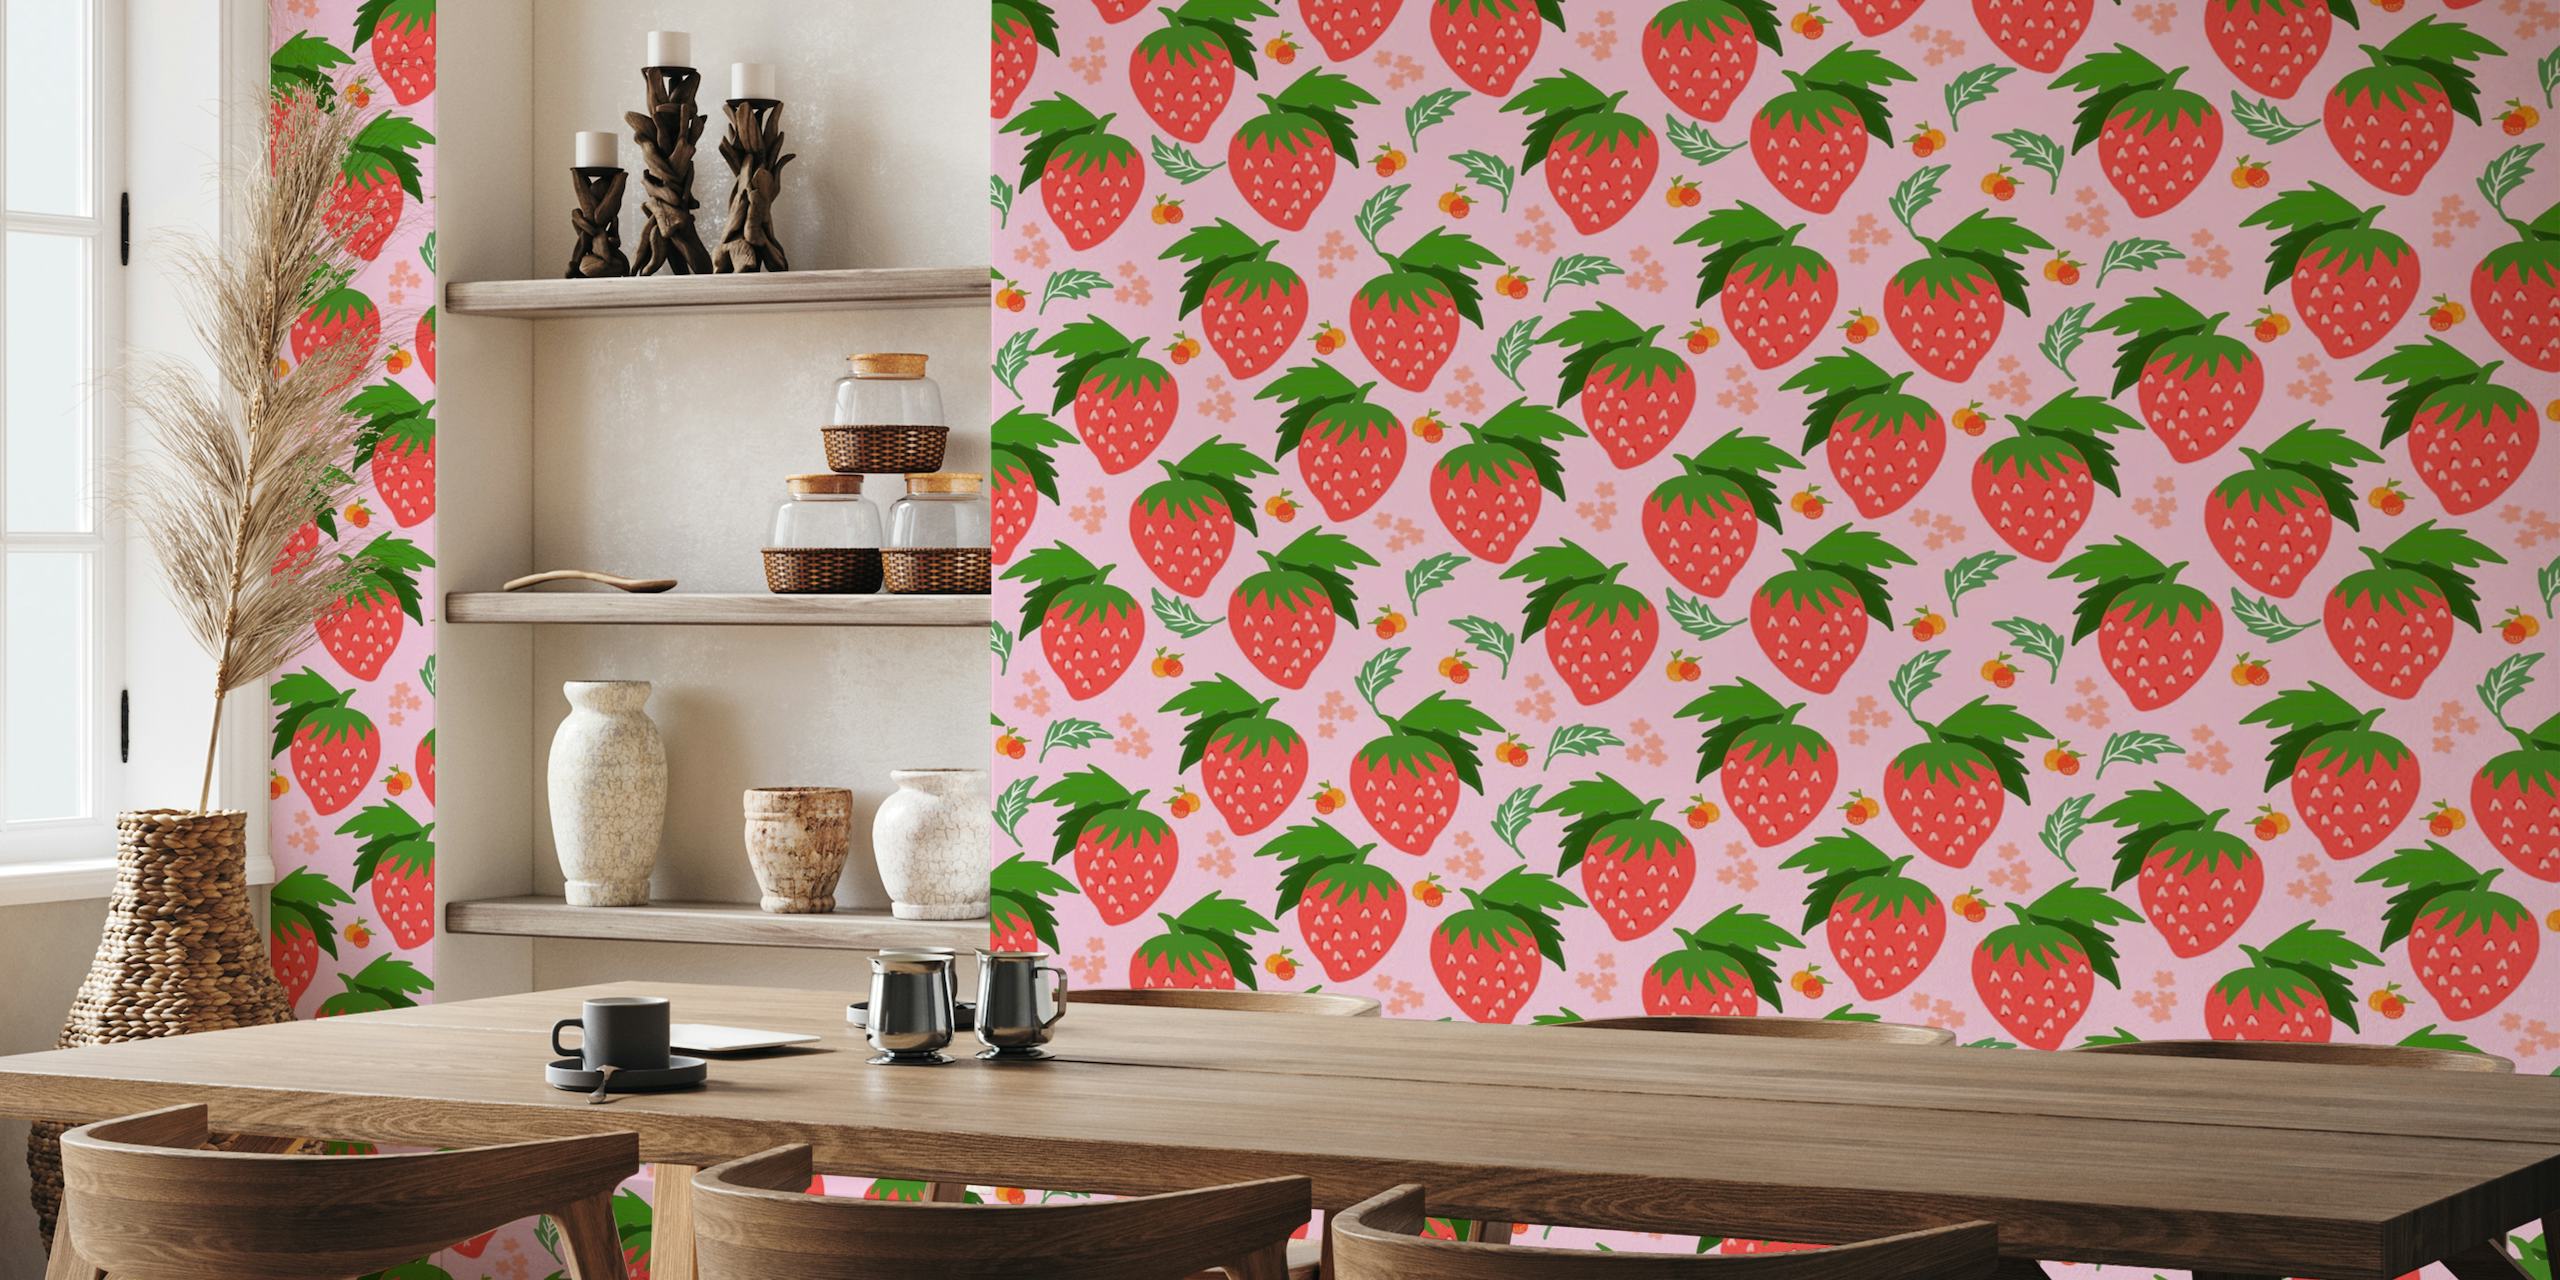 Strawberries and Pink fruit with leaves and elements kawaii style cute pattern behang